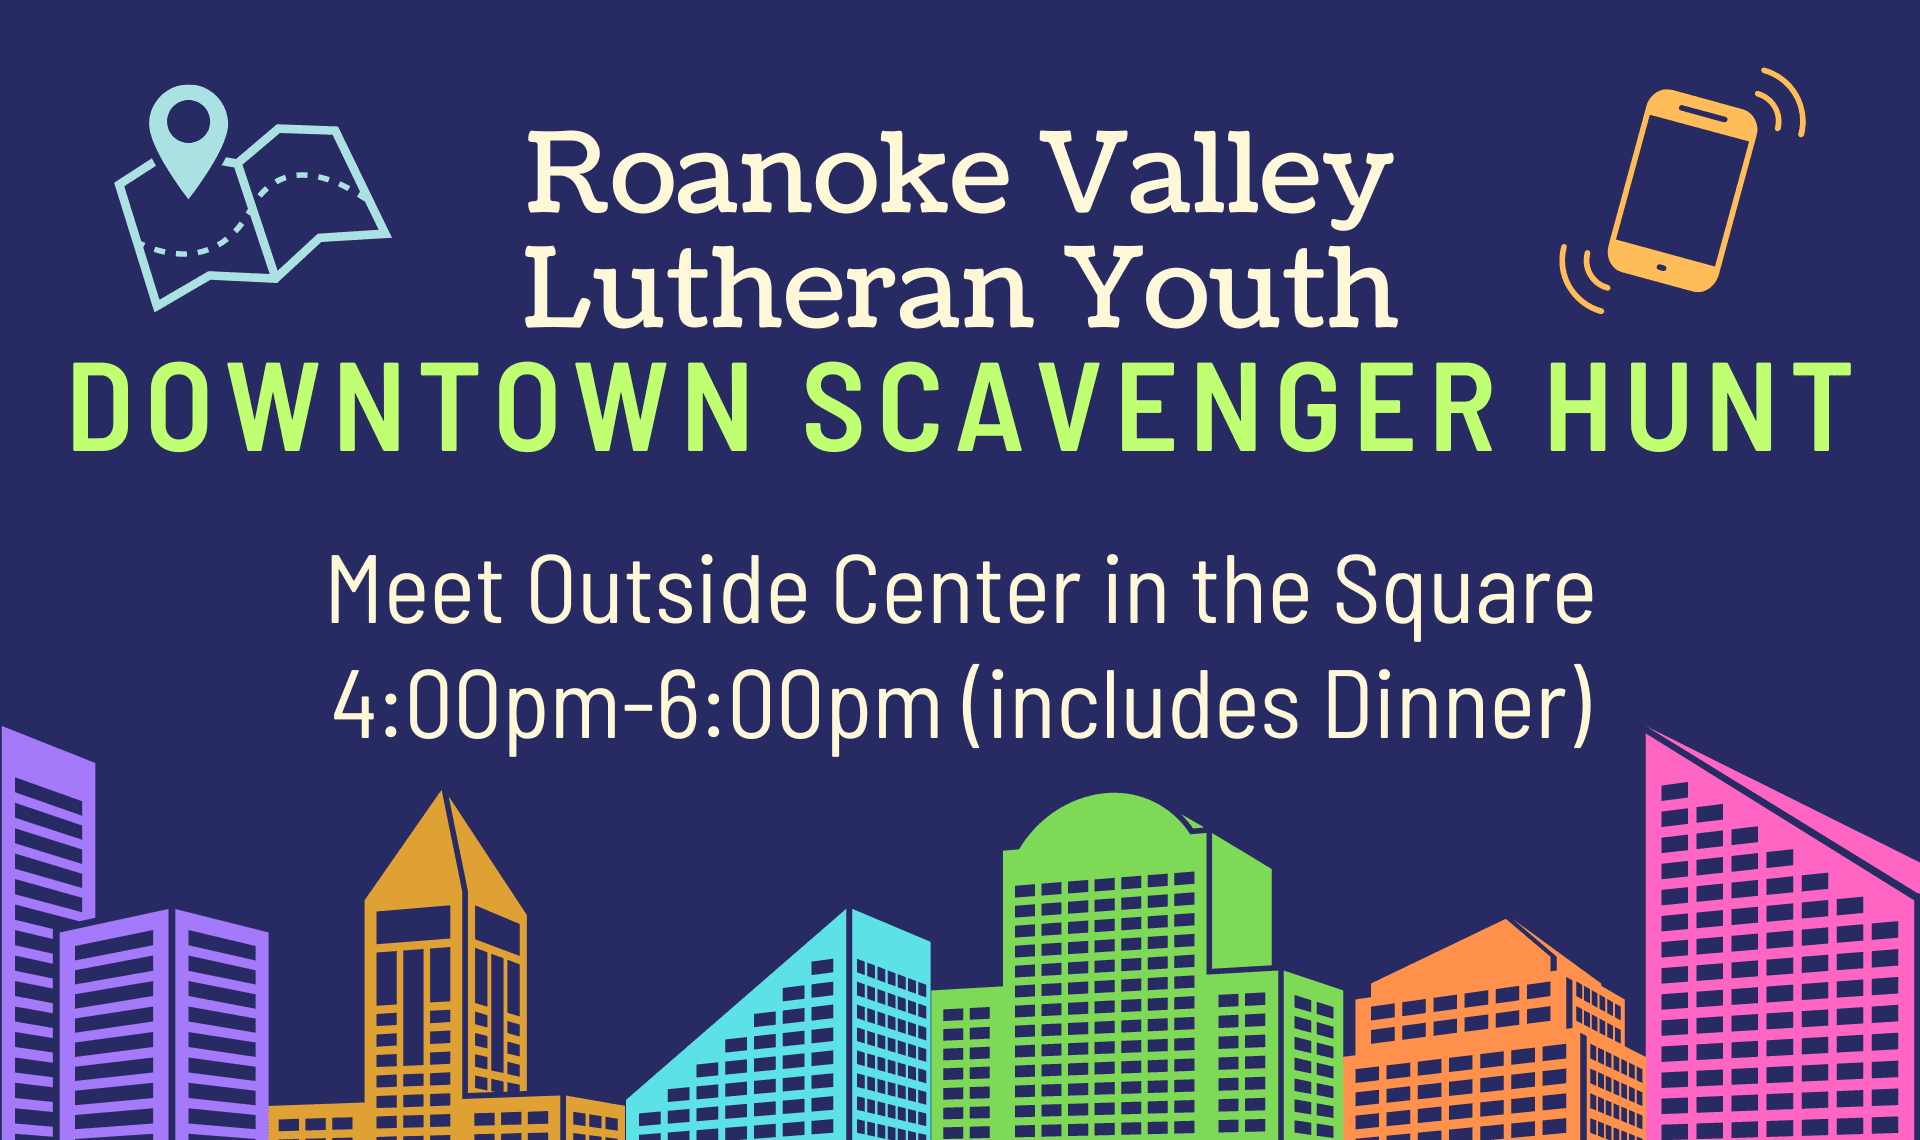 Roanoke Valley Lutheran Youth